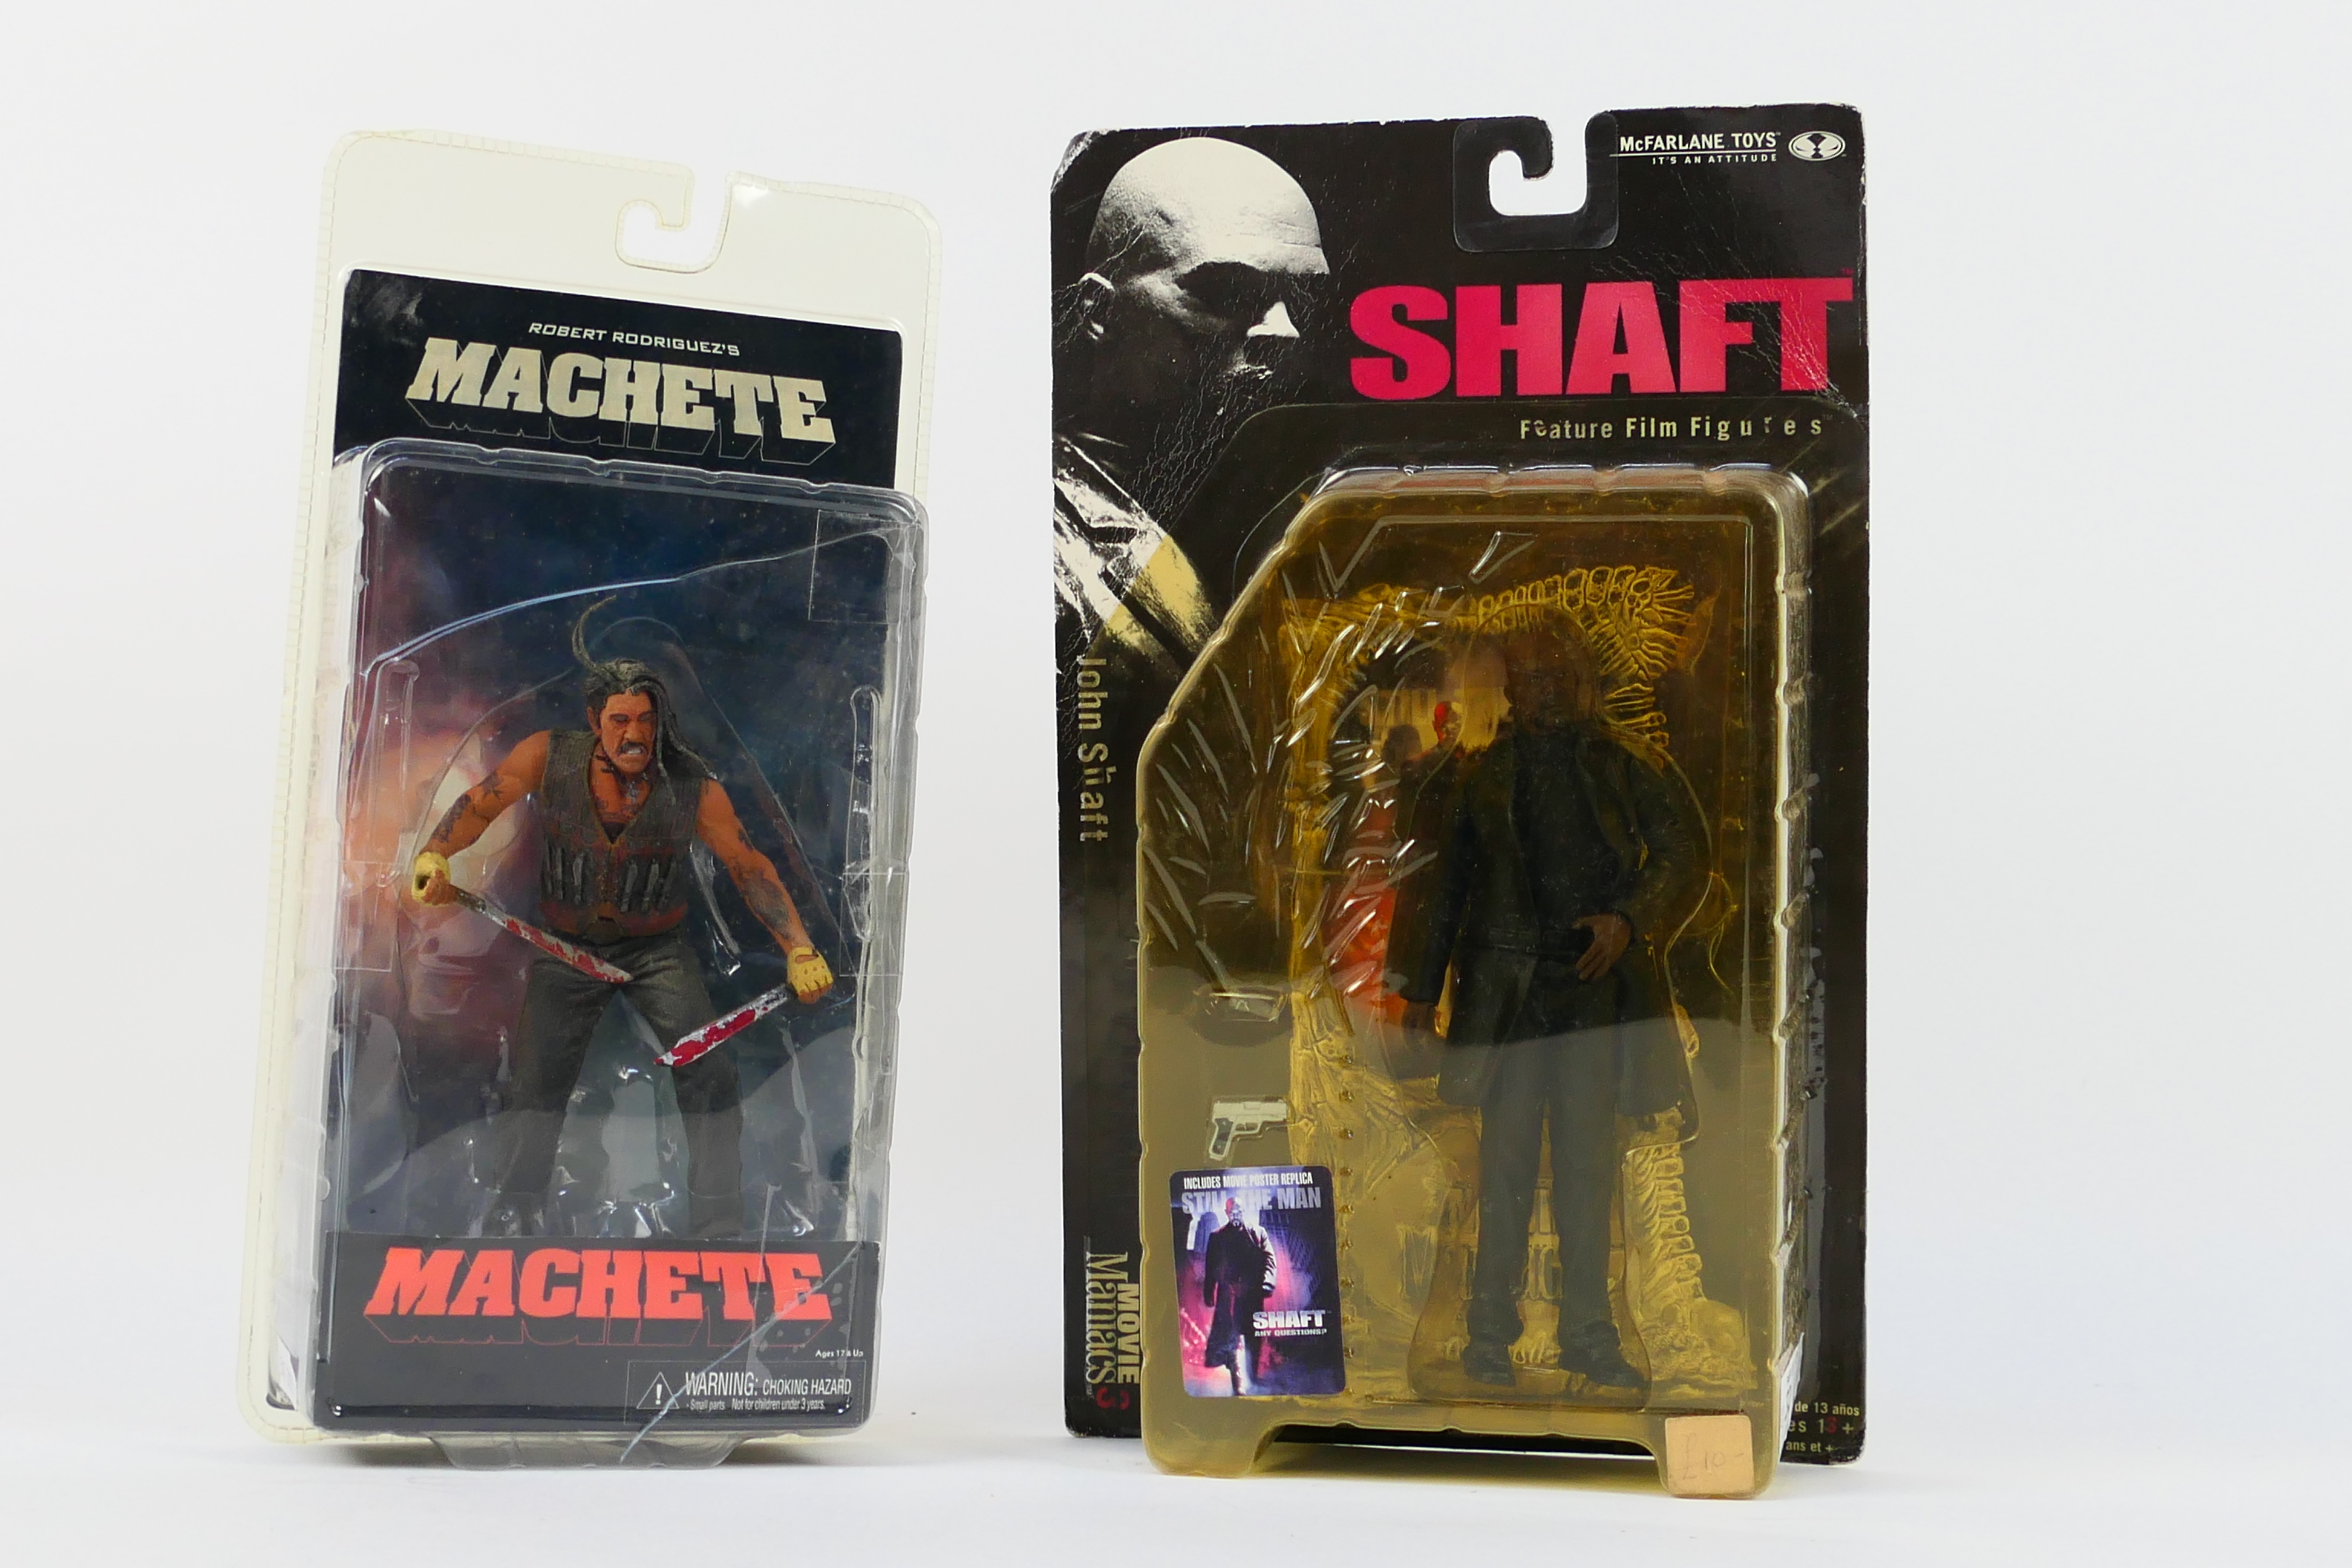 Neca - Troublemaker - 2 x carded figures, Danny Trejo from Machete and John Shaft from Shaft.